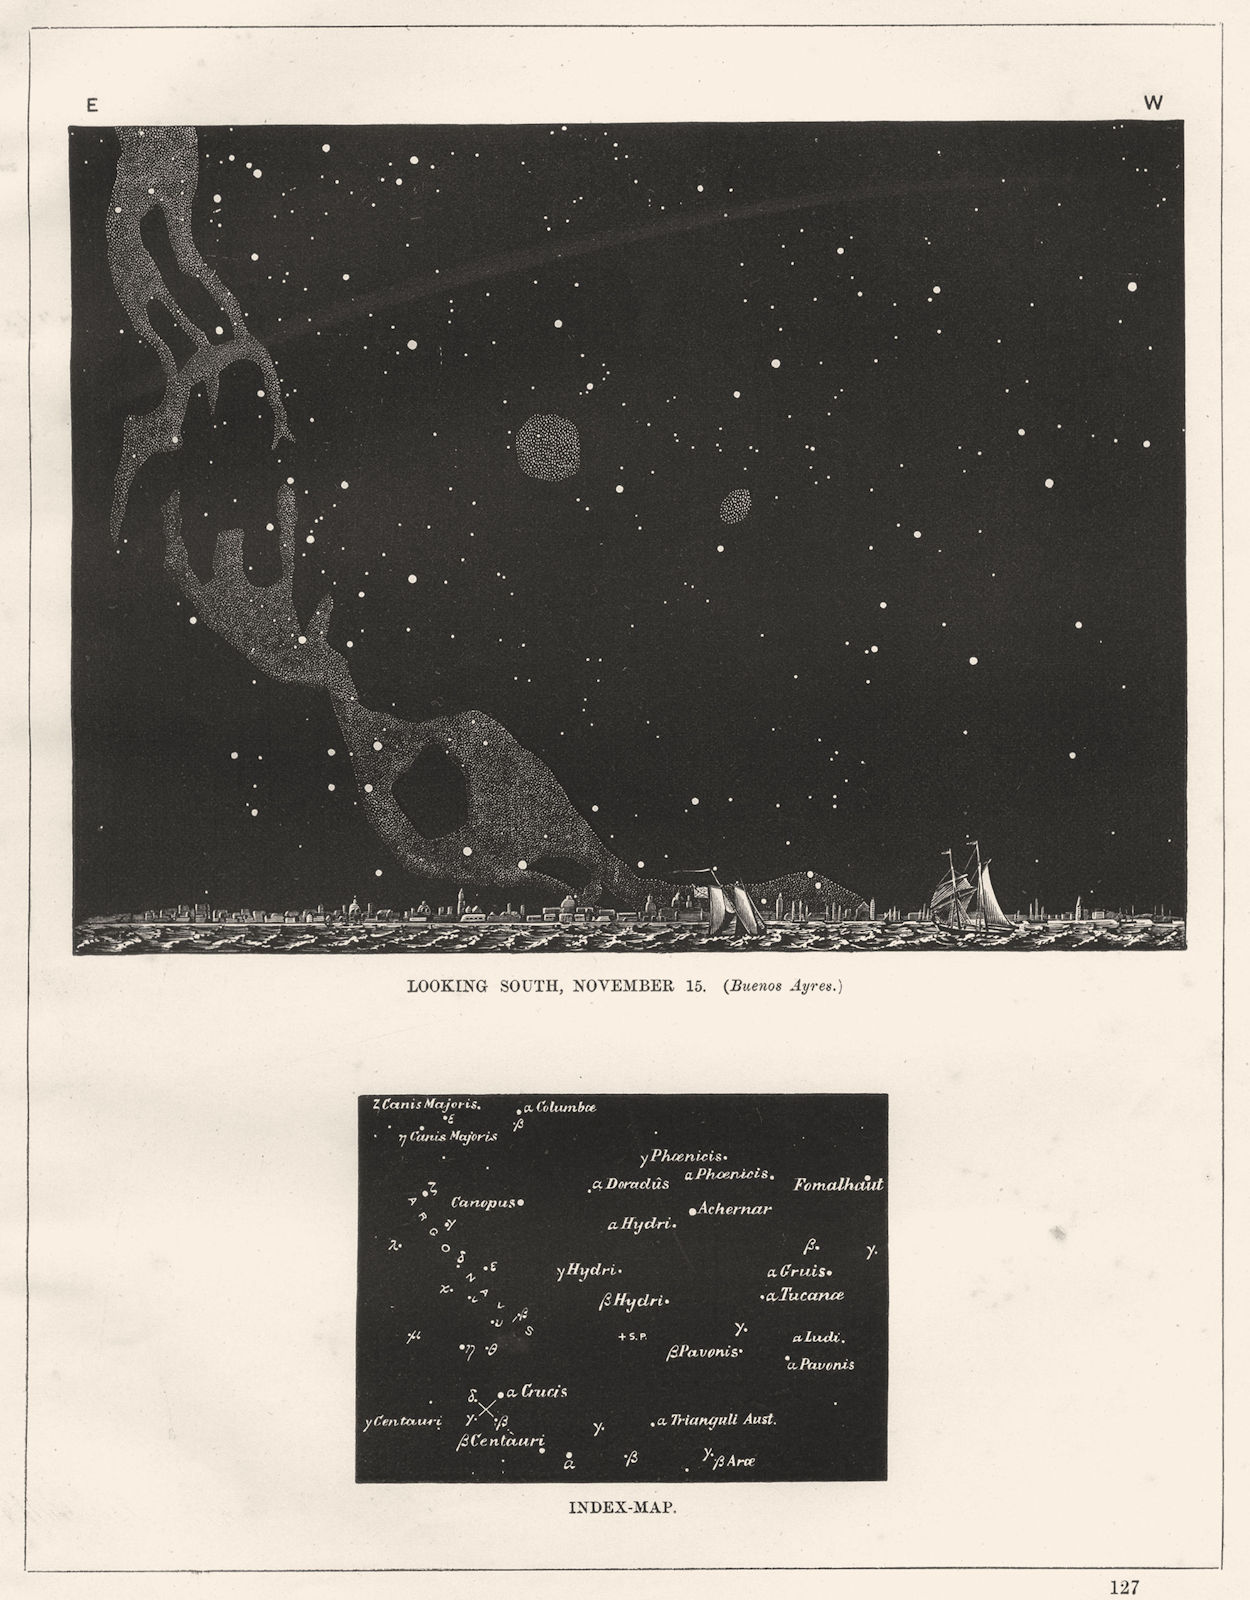 BUENOS AIRES. Midnight sky of Southern Hemisphere. Looking south, Nov 15 1869